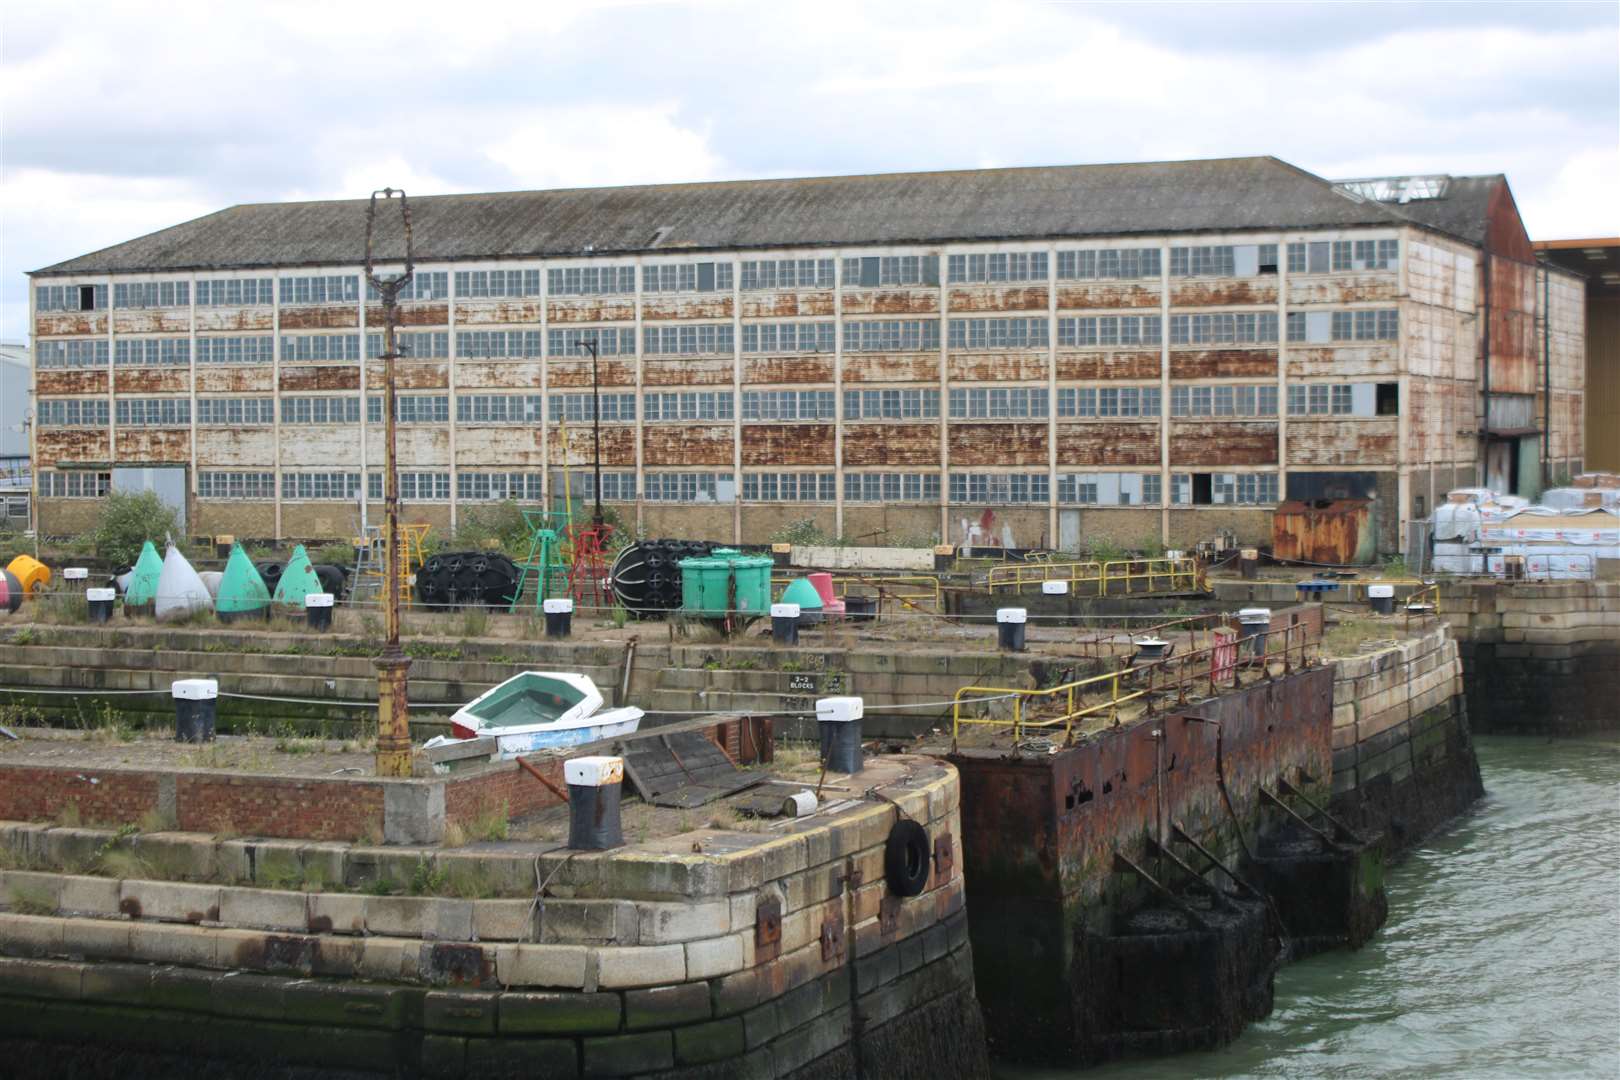 The historic Boat Store in Sheerness Docks. Its cast iron frame was the forerunner of today's skyscrapers. Picture: Clive Holden (55165222)